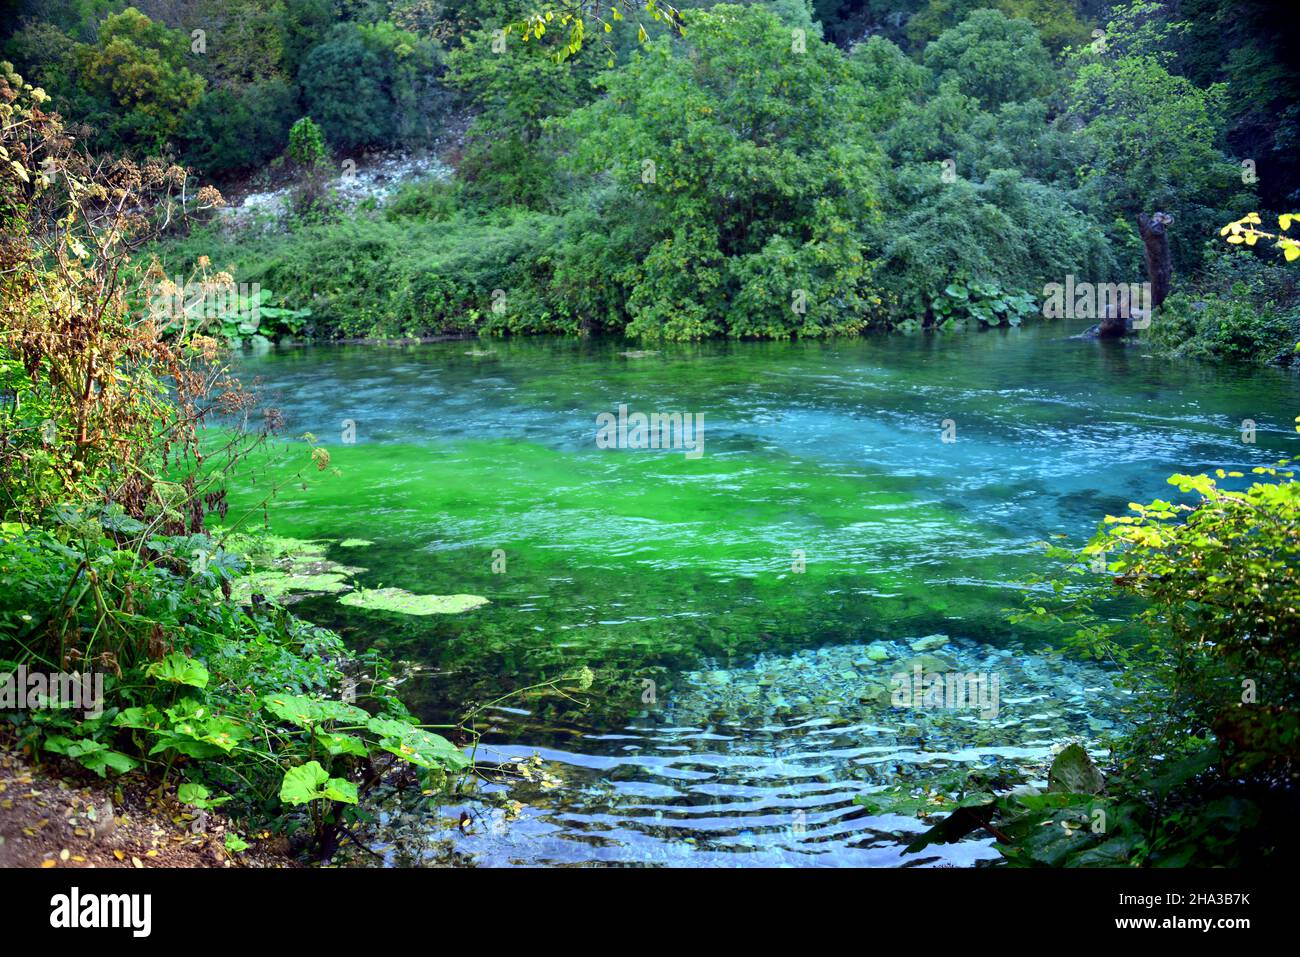 Syri i Kaltër is a karst spring, the depth of which is still unknown, hidden in the middle of a dense forest of oaks and sycamores. Stock Photo